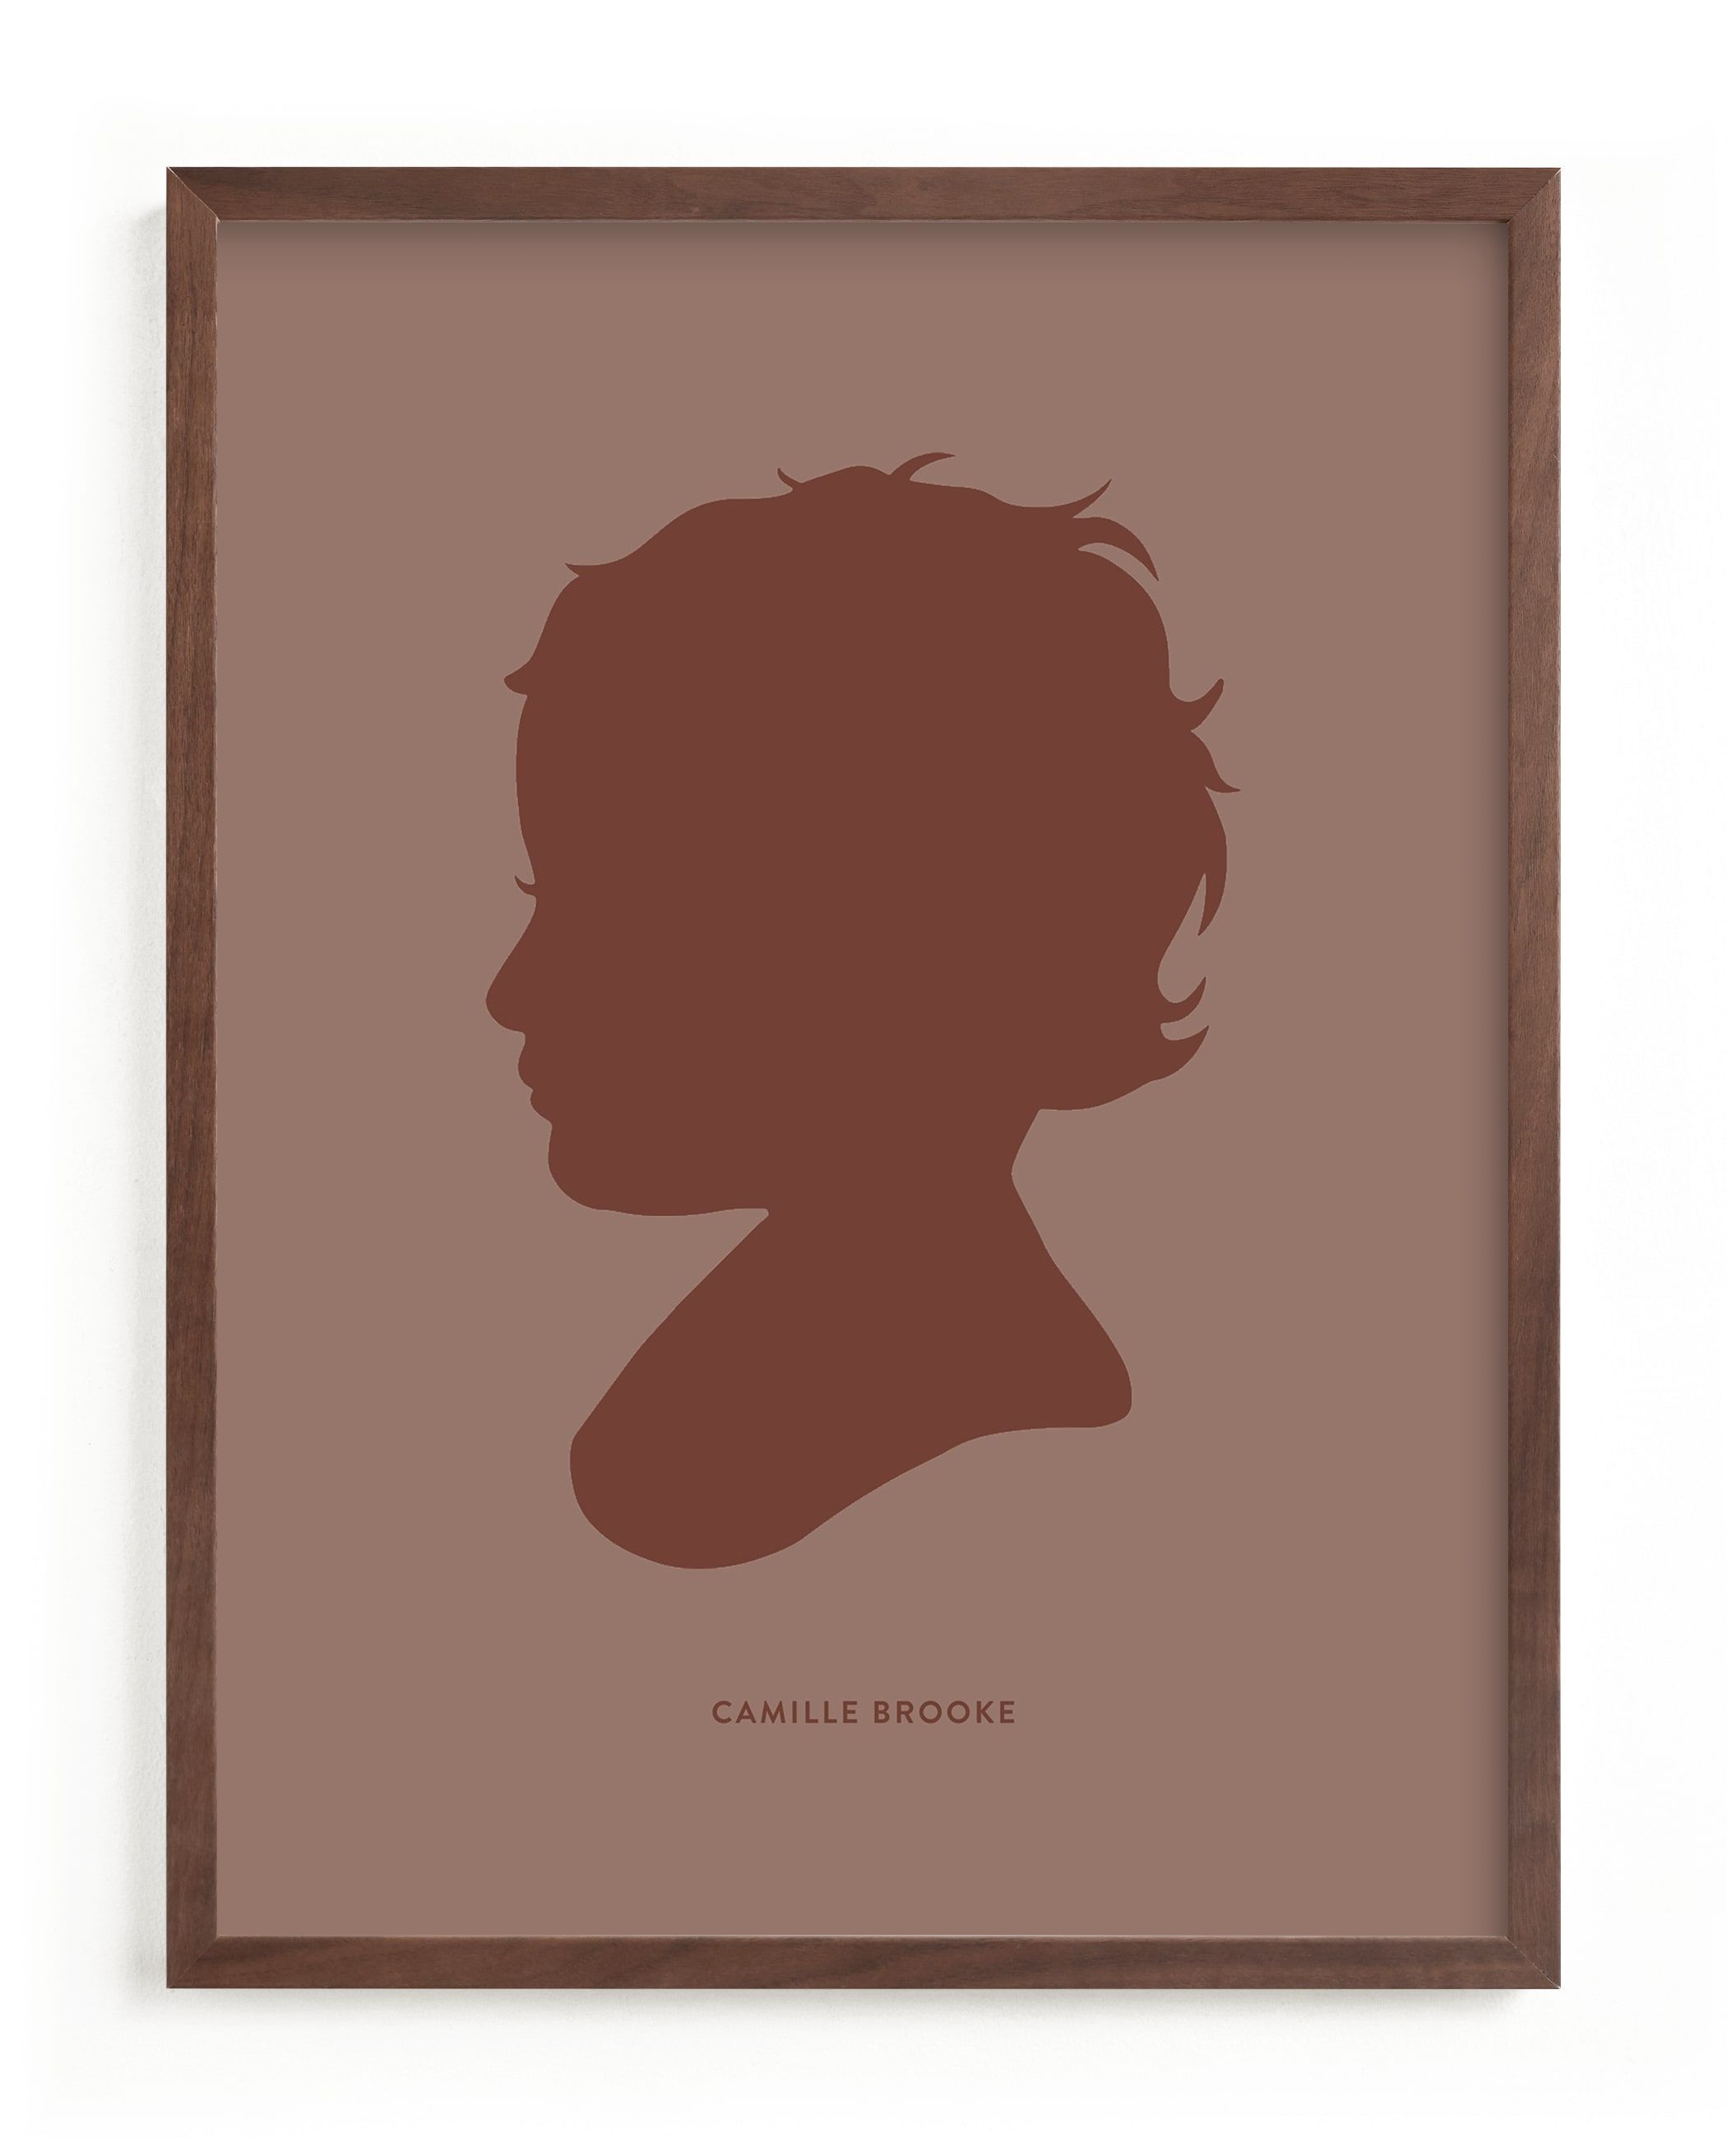 "Tone on Tone Silhouette" - Silhouette Digital Art by Minted. | Minted